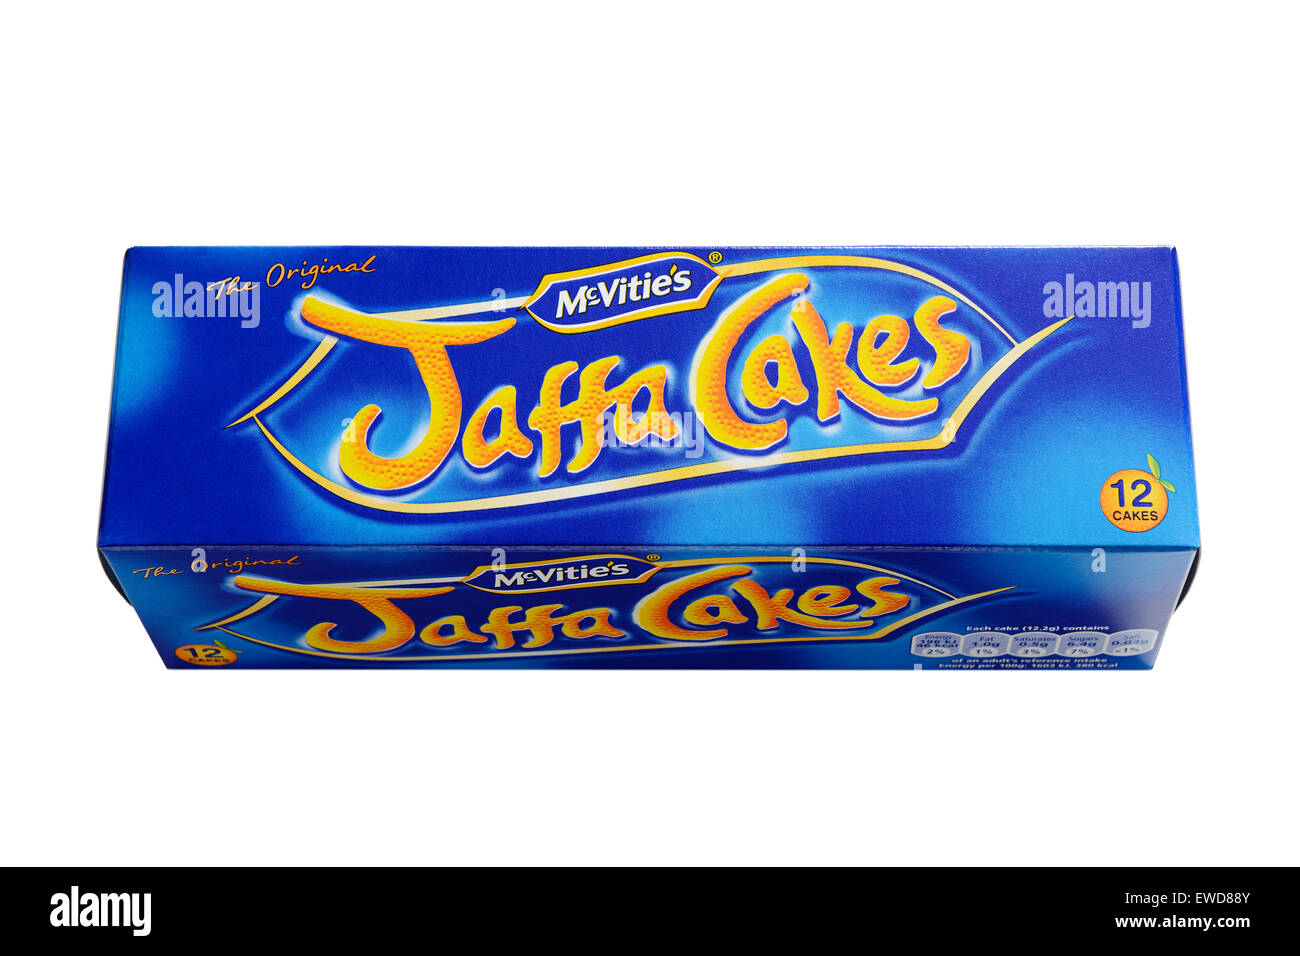 Jaffa Cakes. Manufactured by McVities, they are well known and popular biscuit sized cake Stock Photo